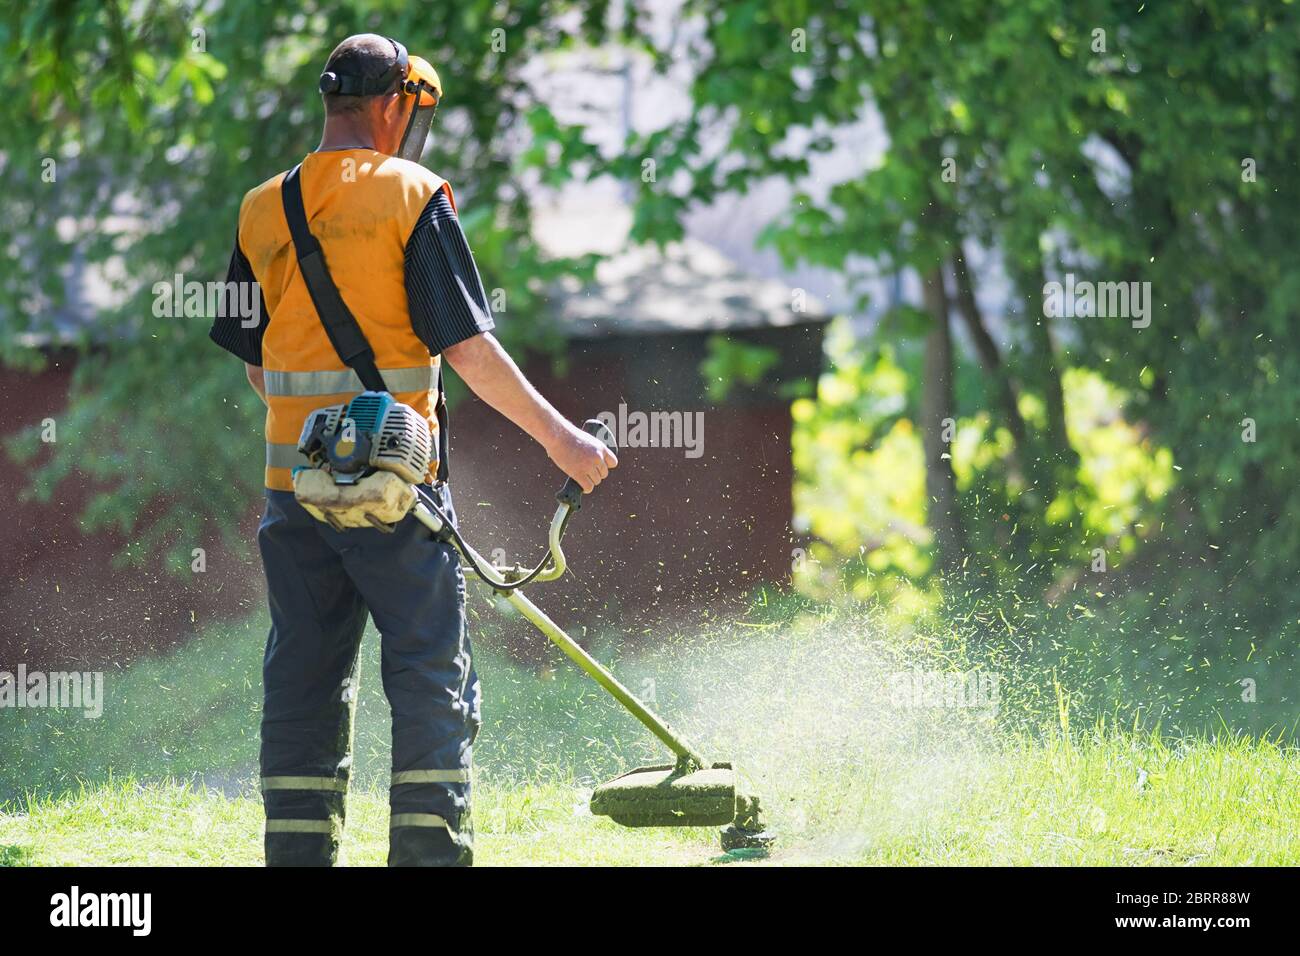 worker cutting grass in garden with the weed trimmer Stock Photo